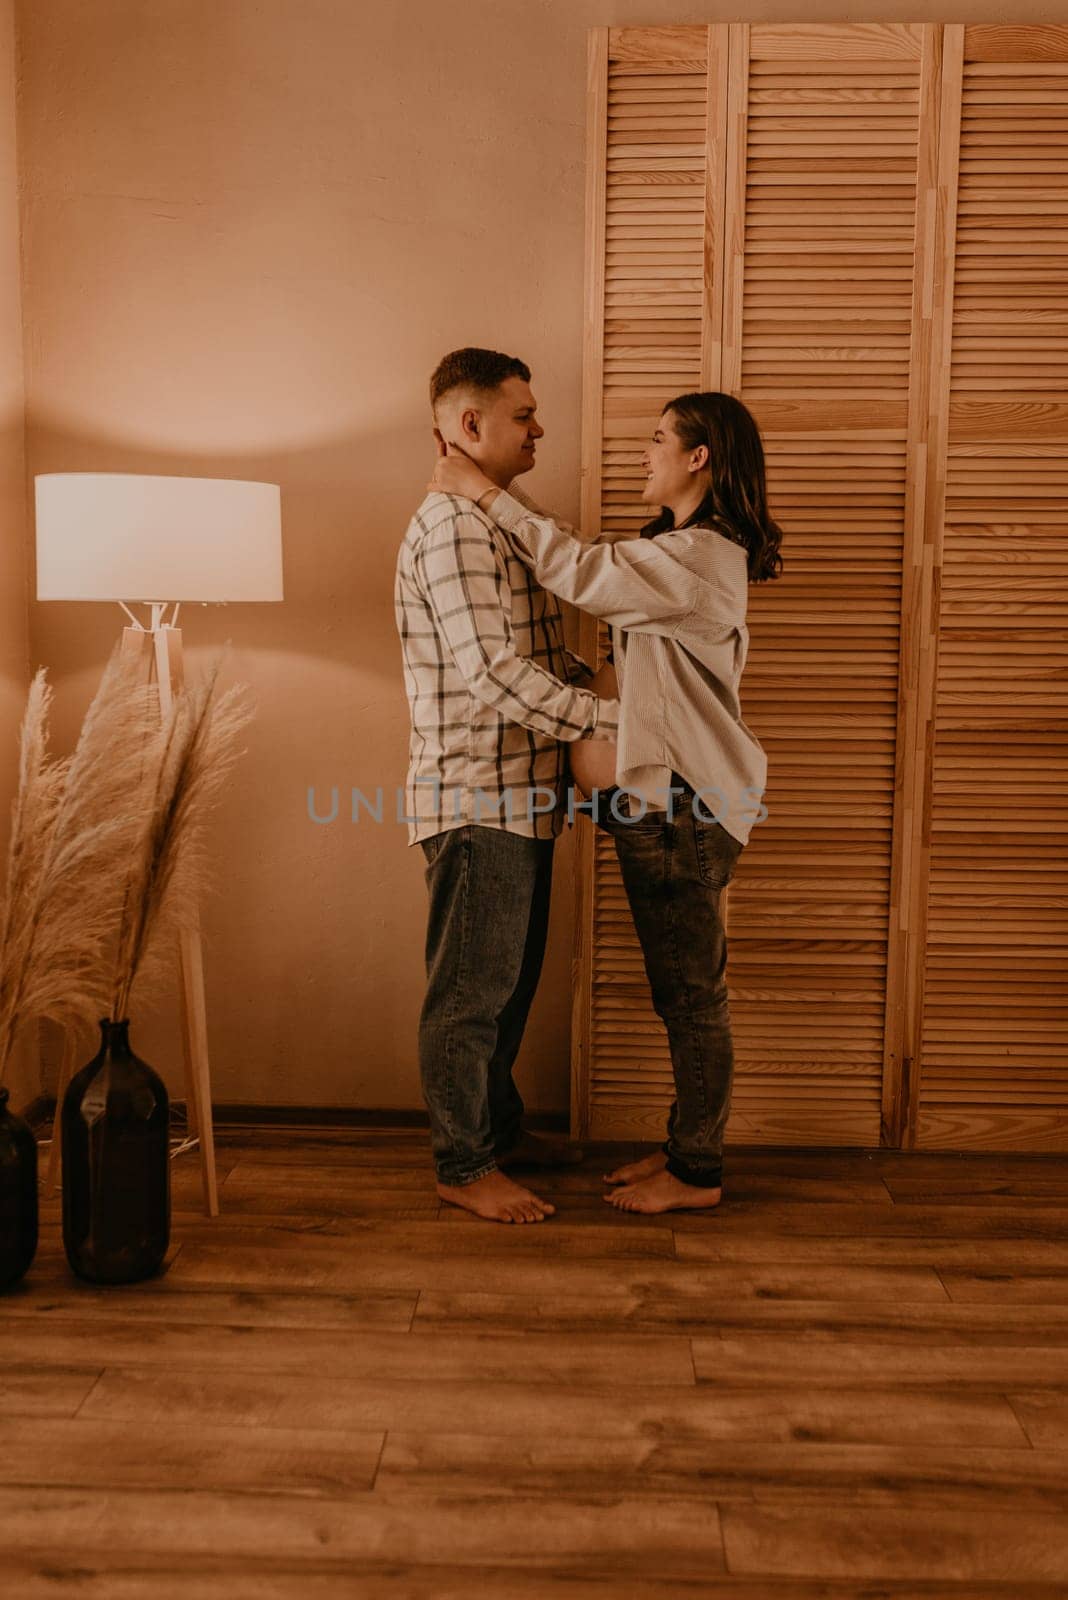 an incredibly beautiful married couple Expecting child, pregnant wife. Happy parenthood, real Ukrainian young family. romantic, gentle, stylish photo session of married couple. pregnant woman in love